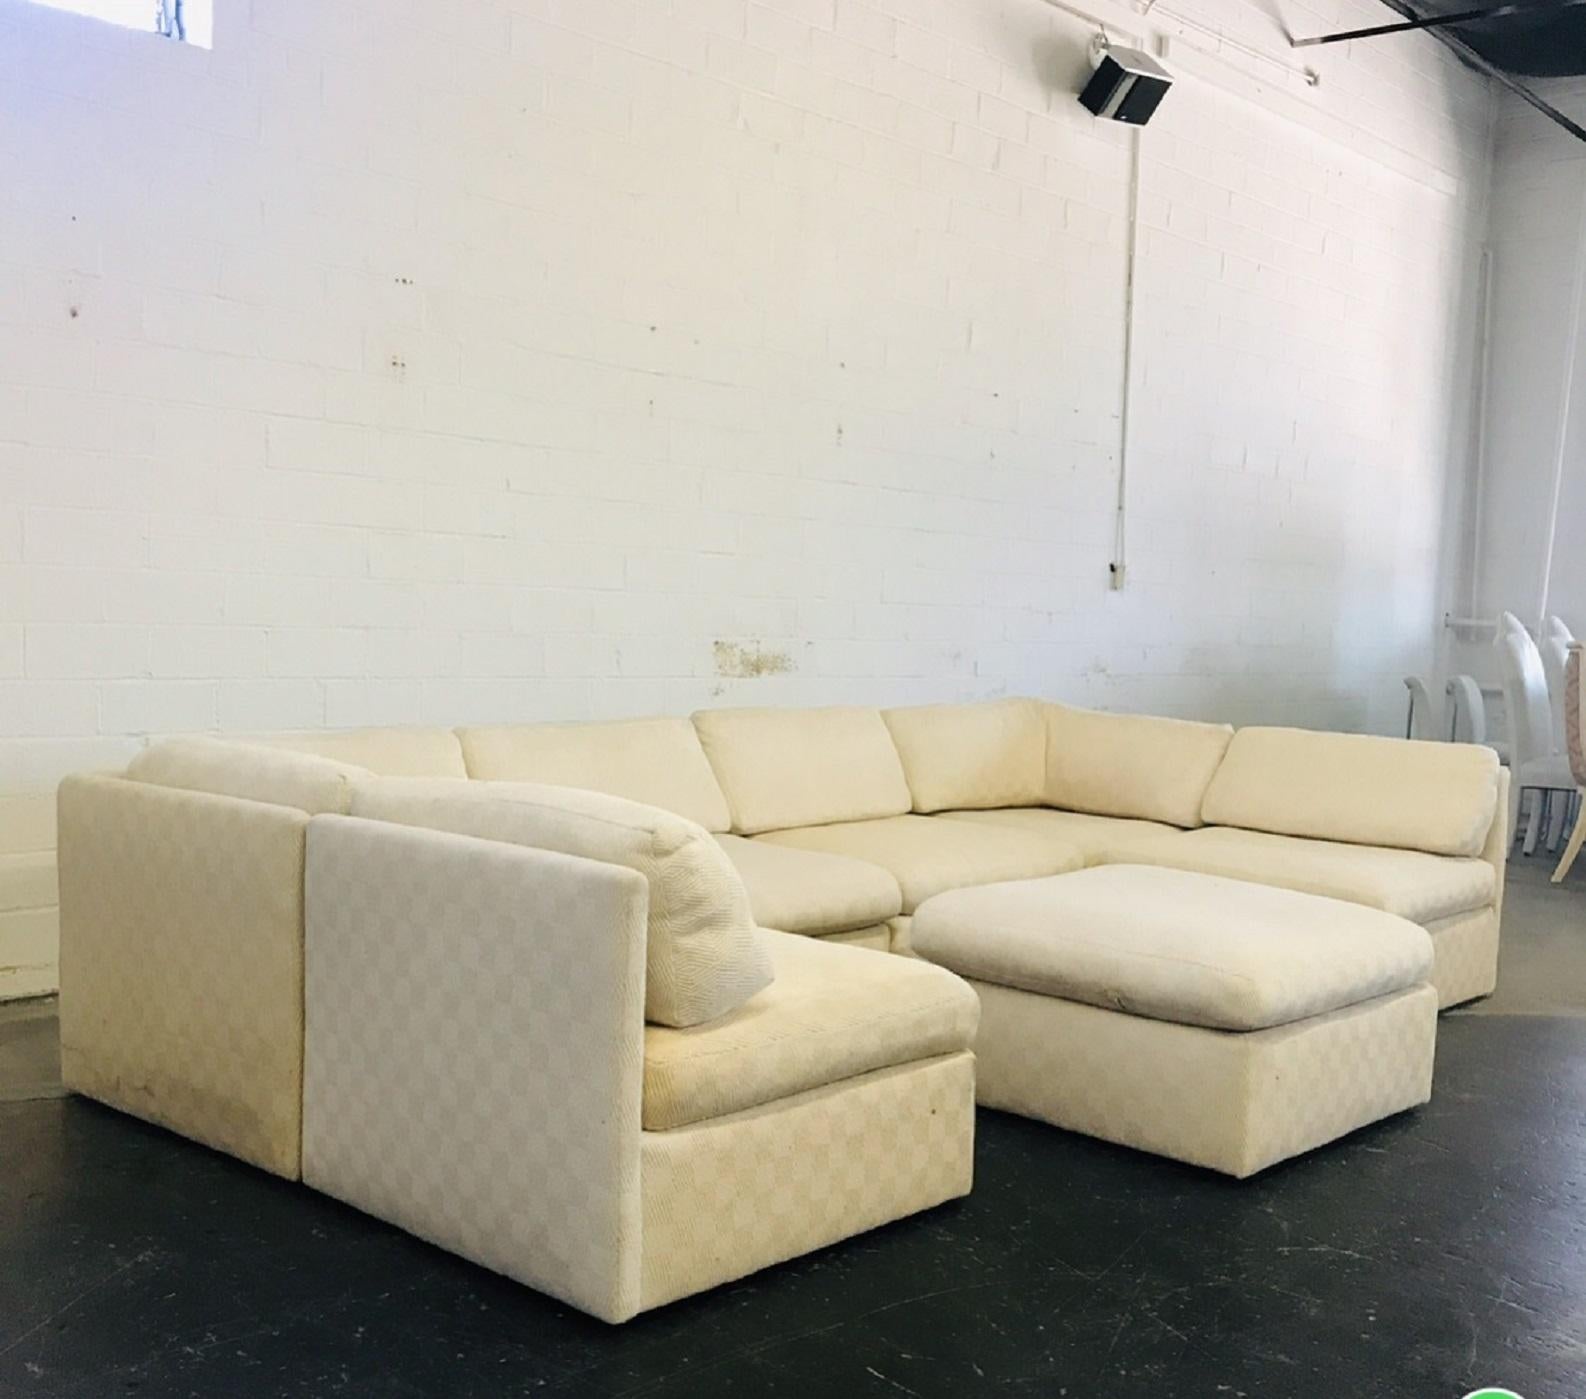 Vintage milo Baughman sectional
Reupholstery recommended.